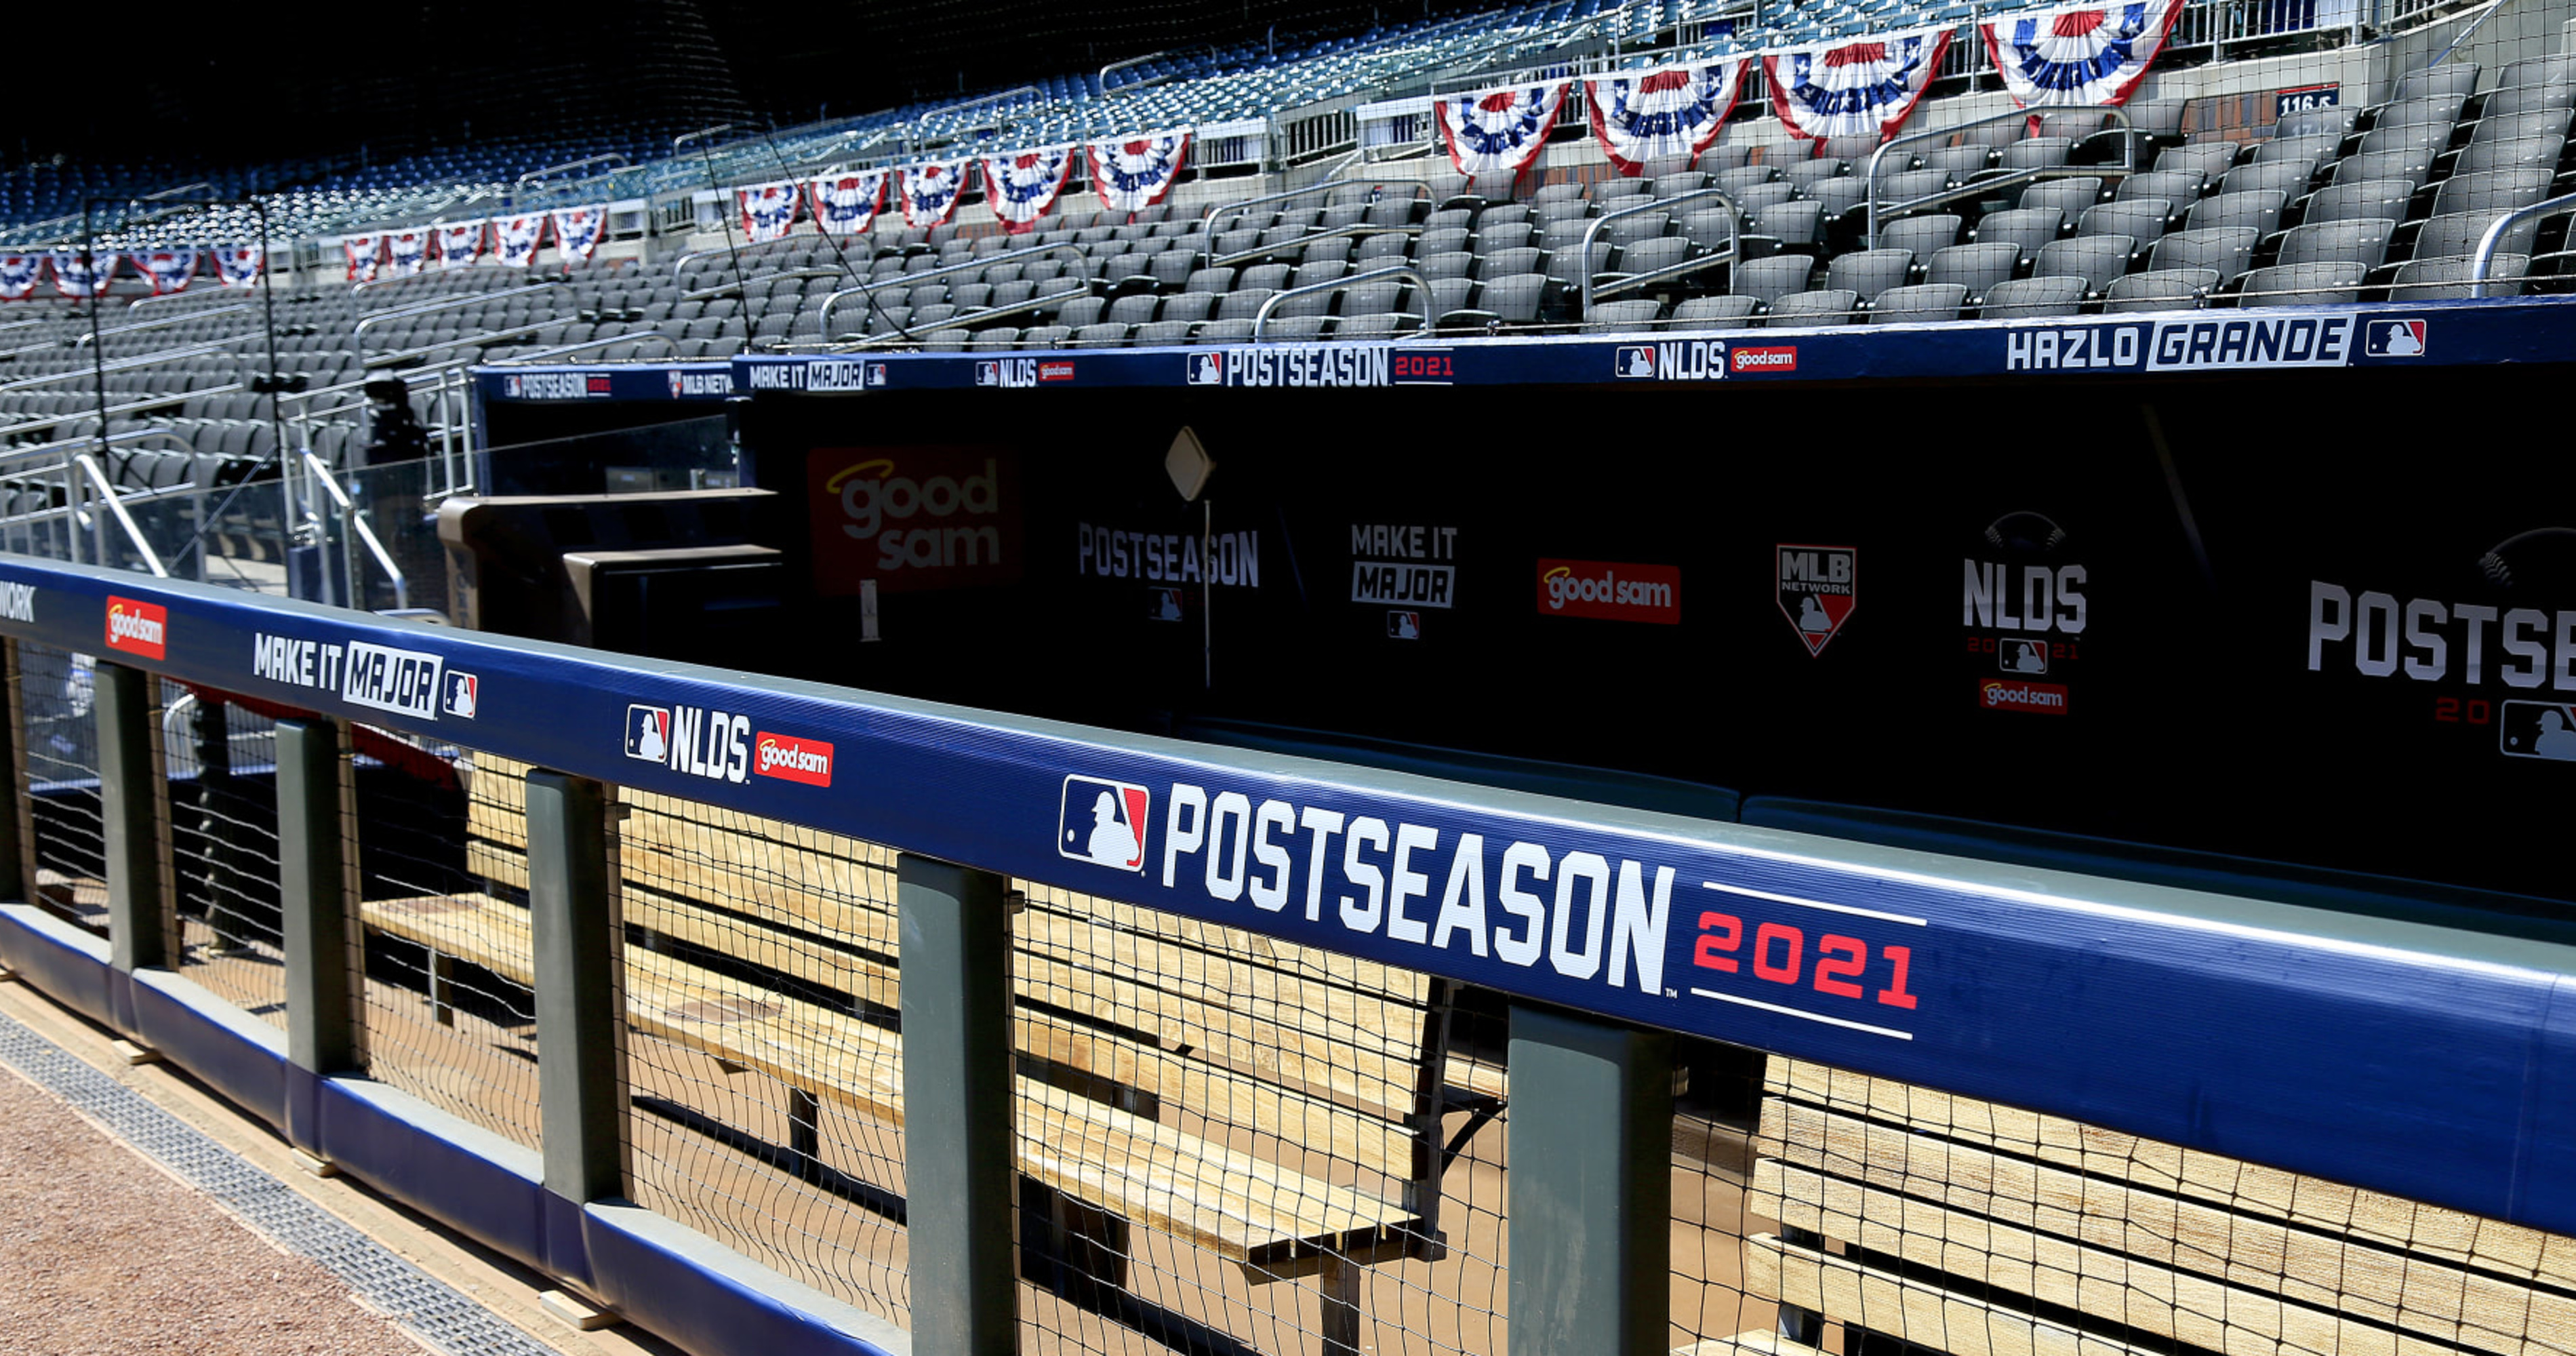 2022 MLB Playoff Guide: New Wild Card Format, TV Schedule Released